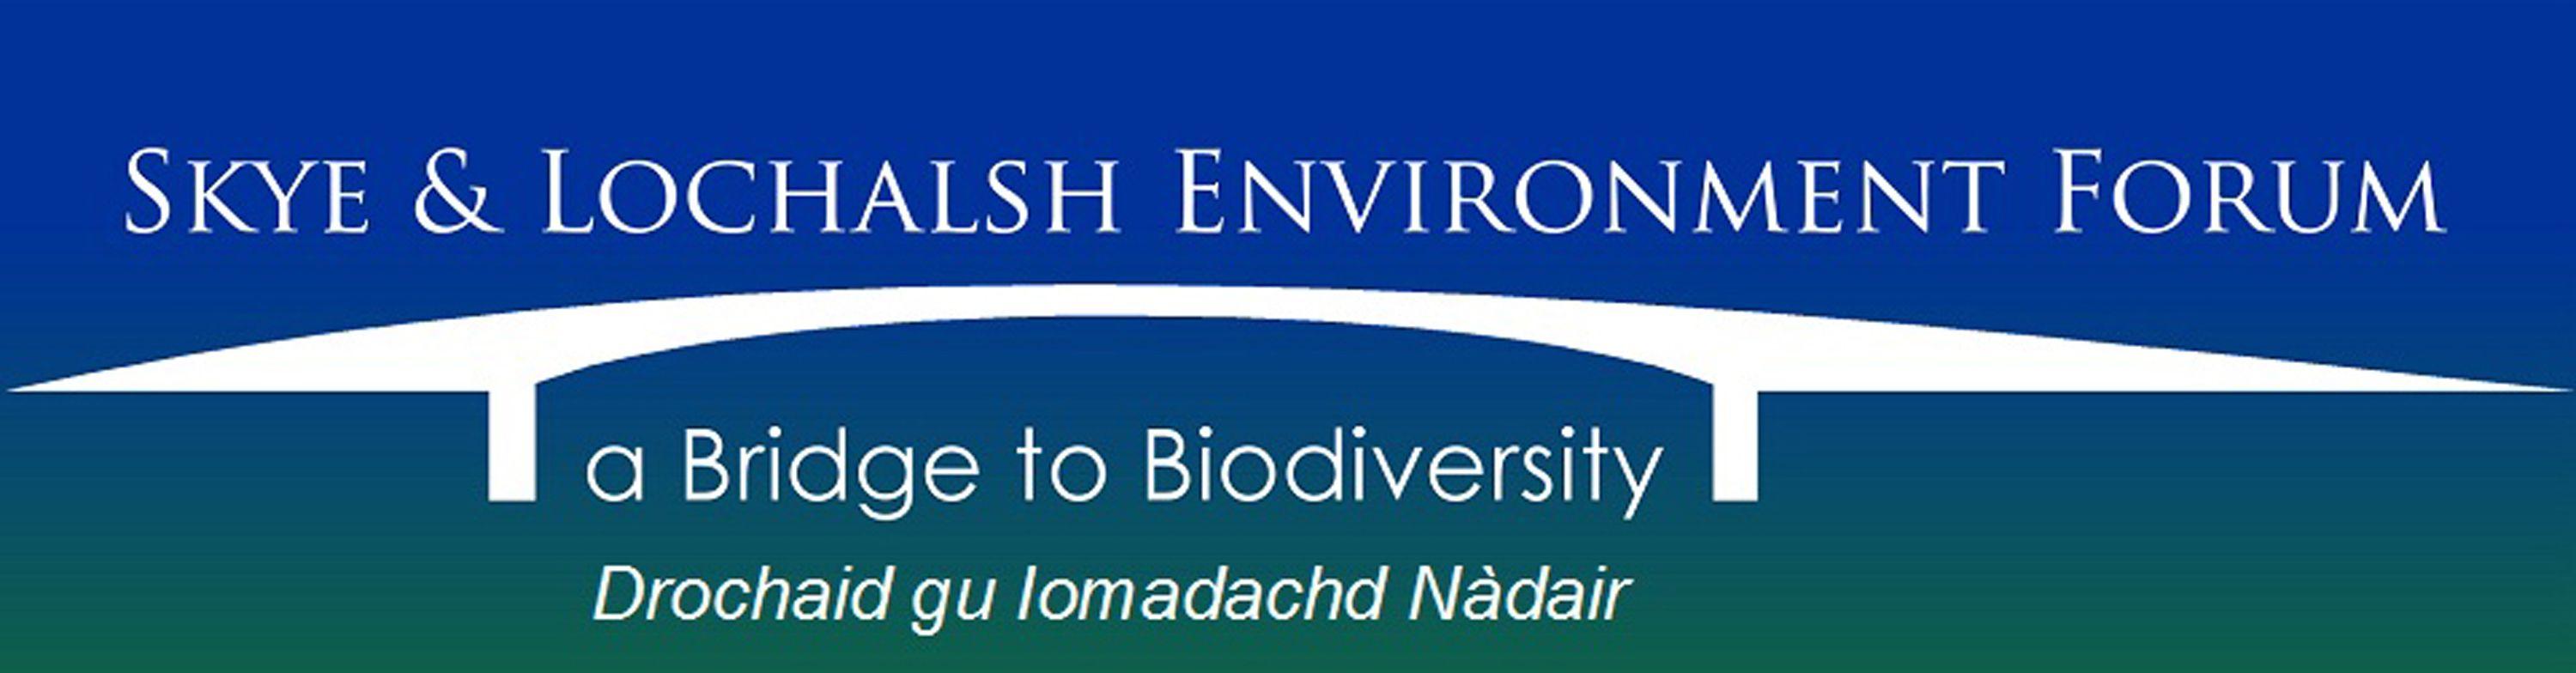 Blue Green and White Logo - Skye and Lochalsh Environment Forum